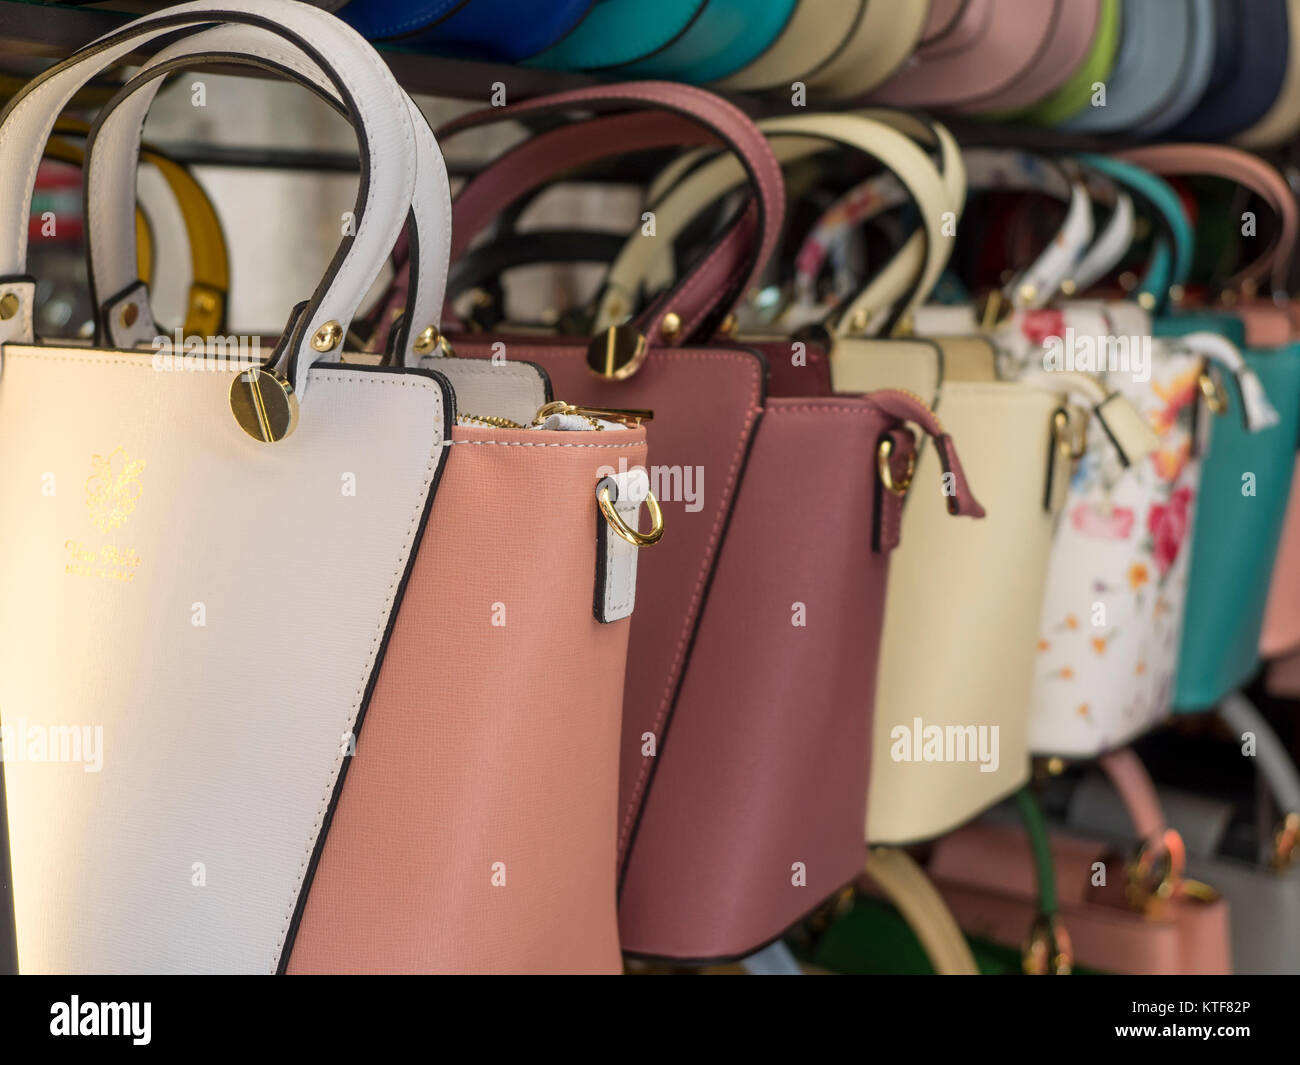 Pile of used worn secondhand bags handbags for sale Stock Photo - Alamy